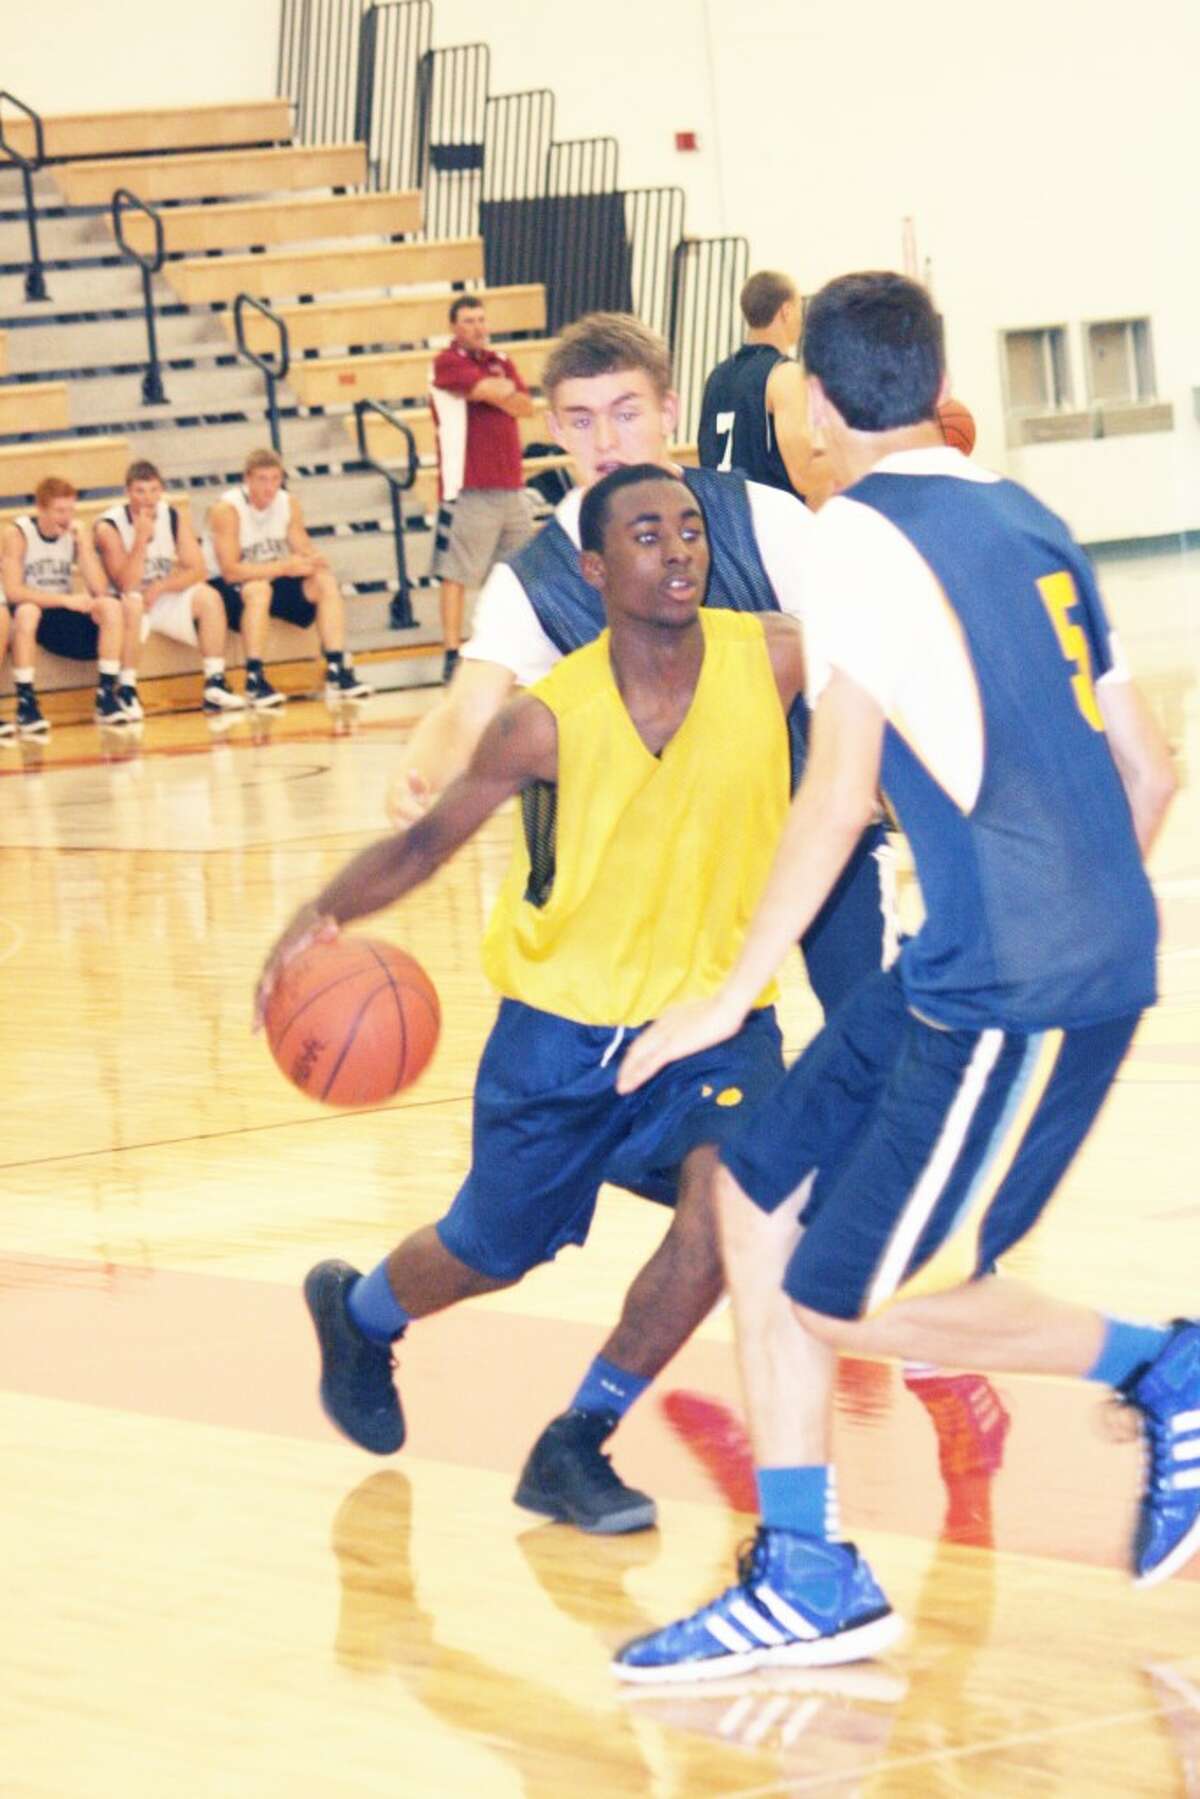 Keeping busy: Basketball teams will be busy during summer camps this month. (File photo)